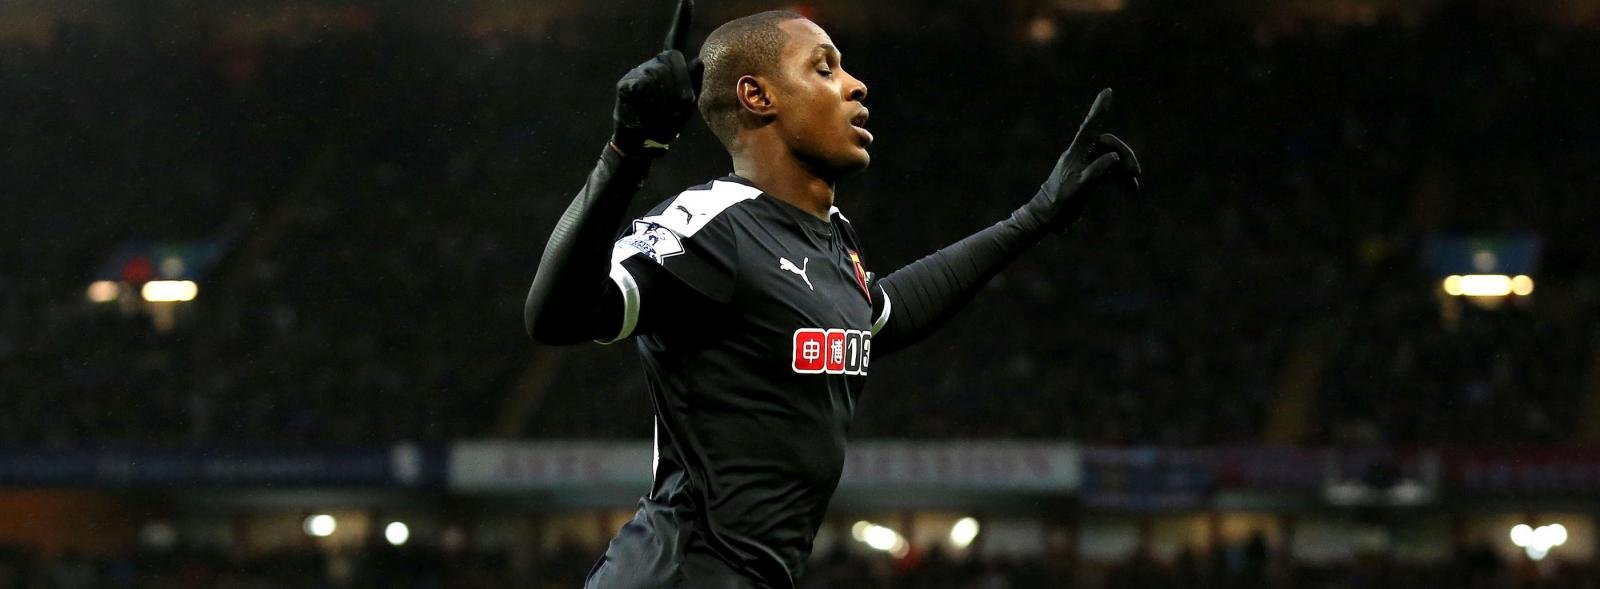 Why £50 million wouldn’t be enough to buy Ighalo